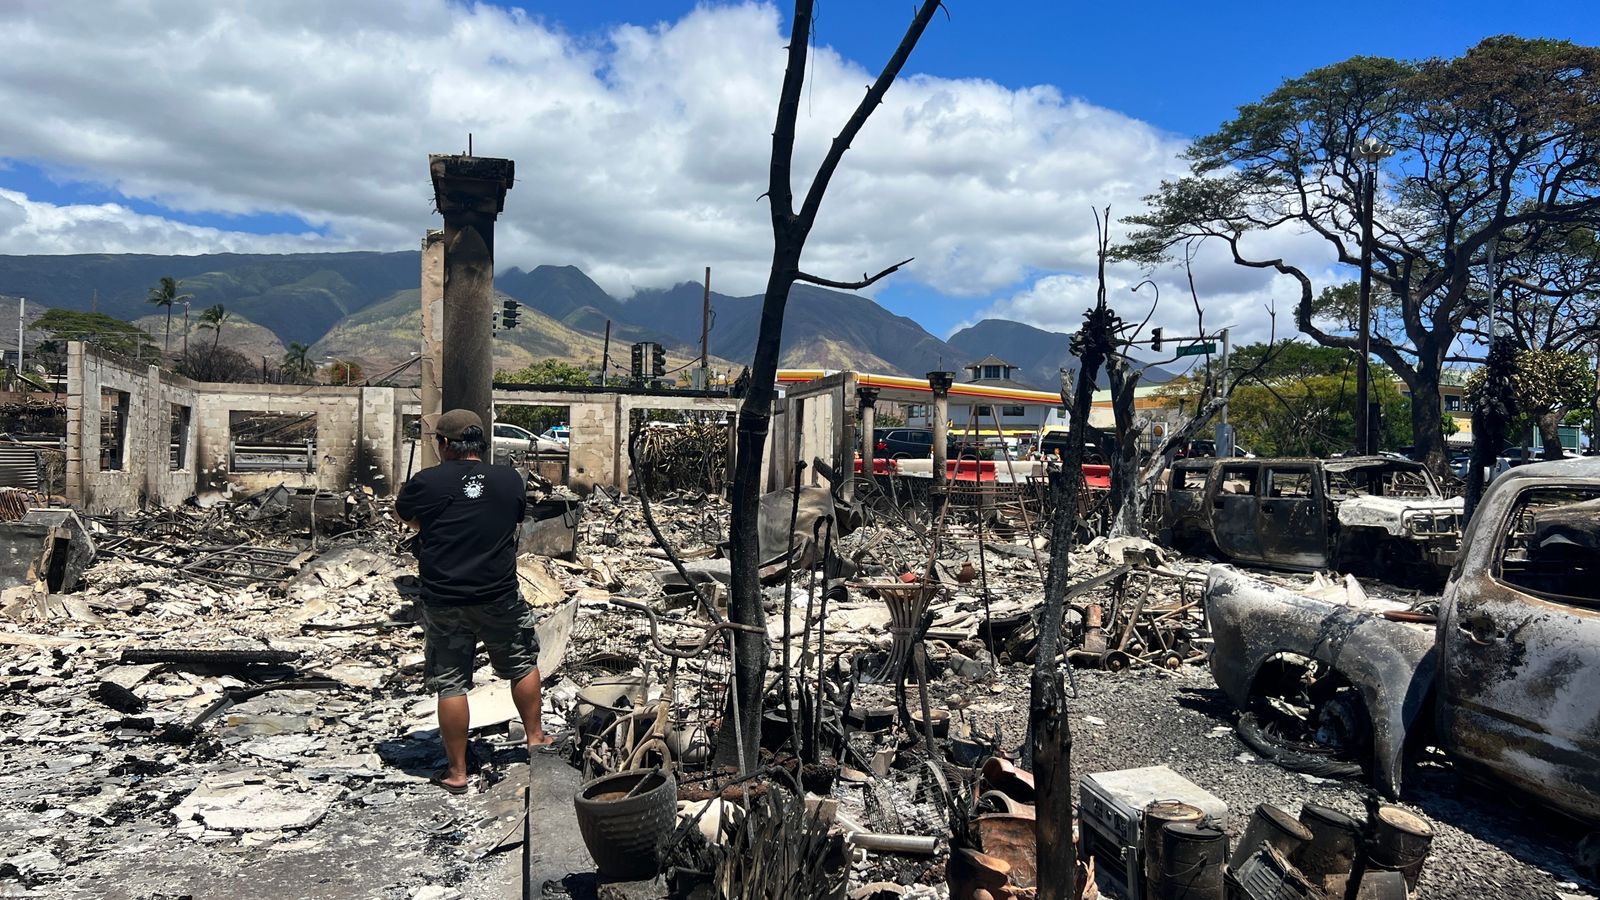 Hawaii wildfire: 'It feels like a bomb has been dropped' say residents returning to aftermath